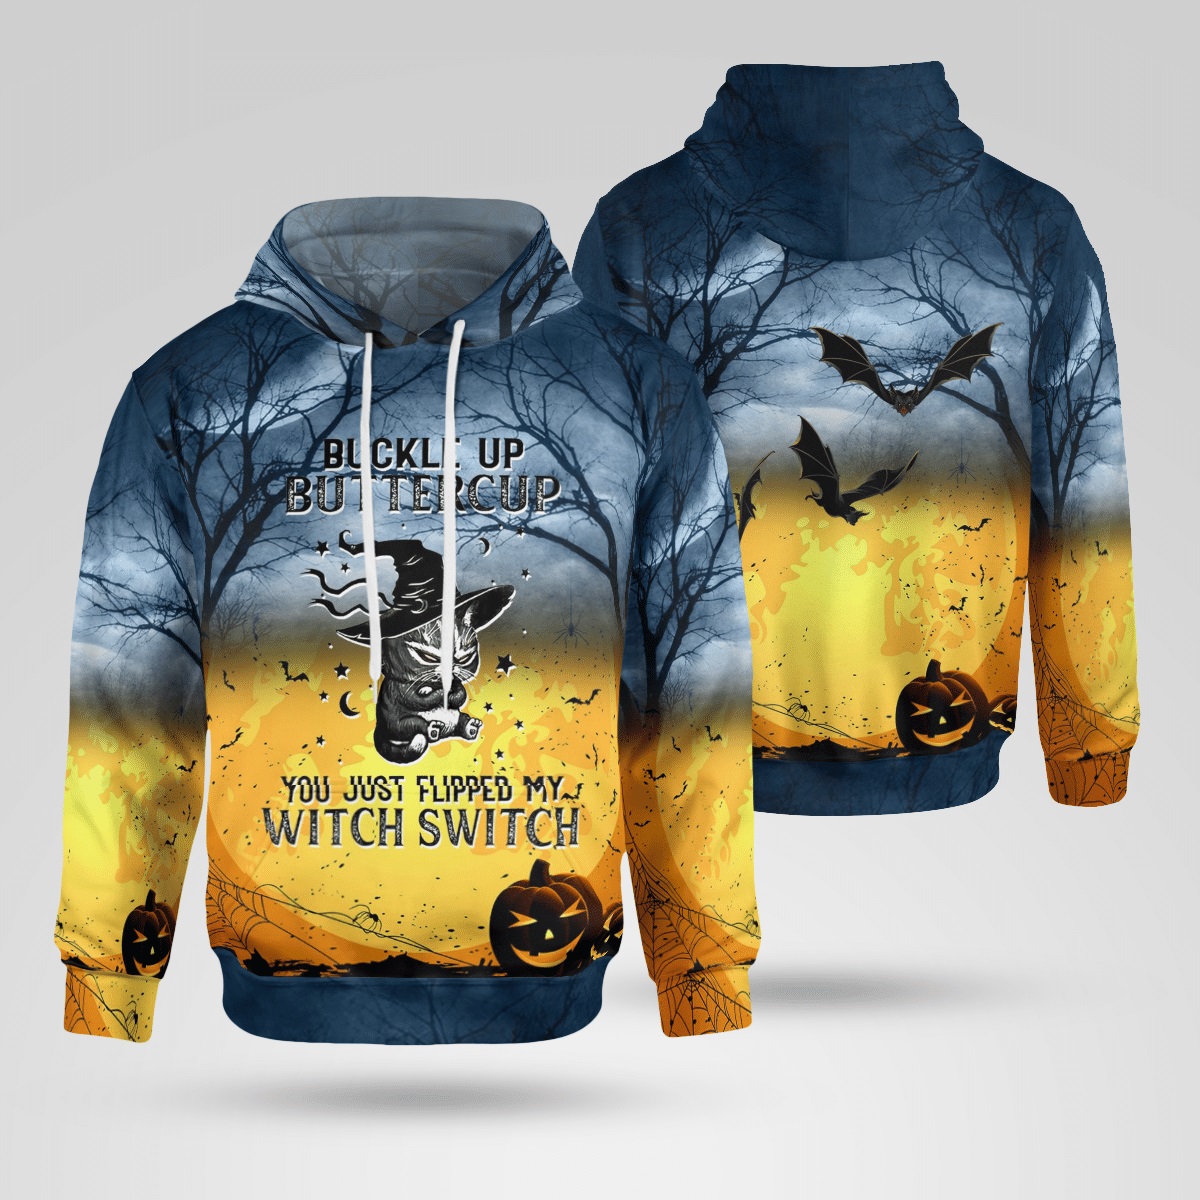 Cat Buckle up buttercup you just flipped my witch switch 3d hoodie and t-shirt – Saleoff 070921